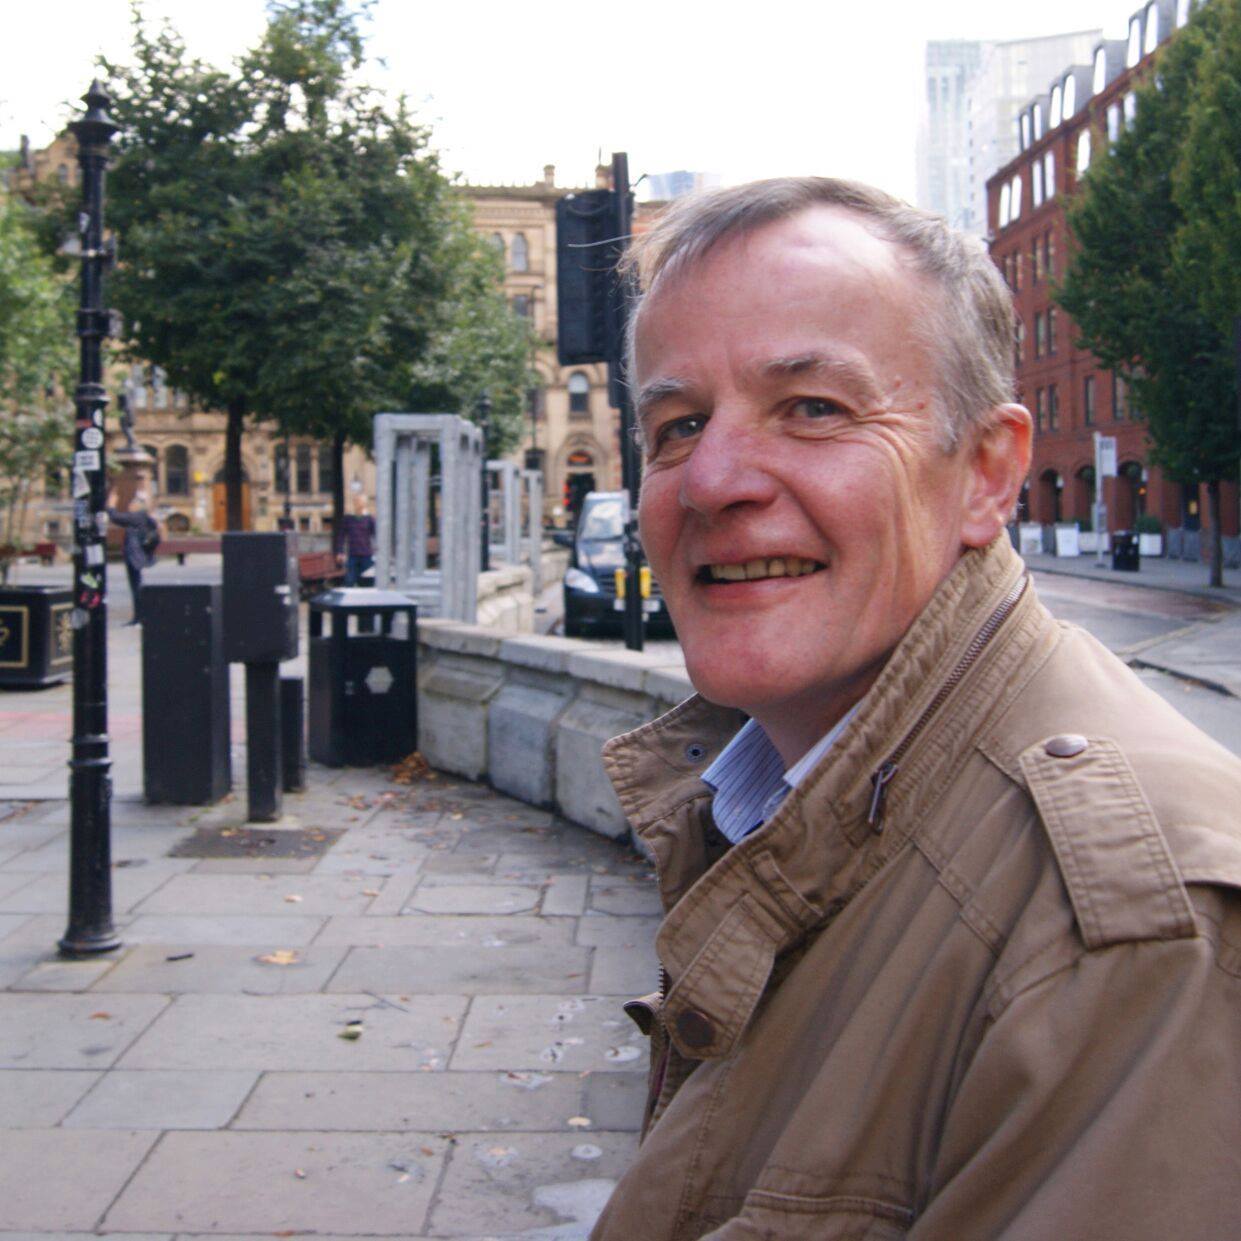 David Jones, Green Party Candidate, in Albert Square, Manchester